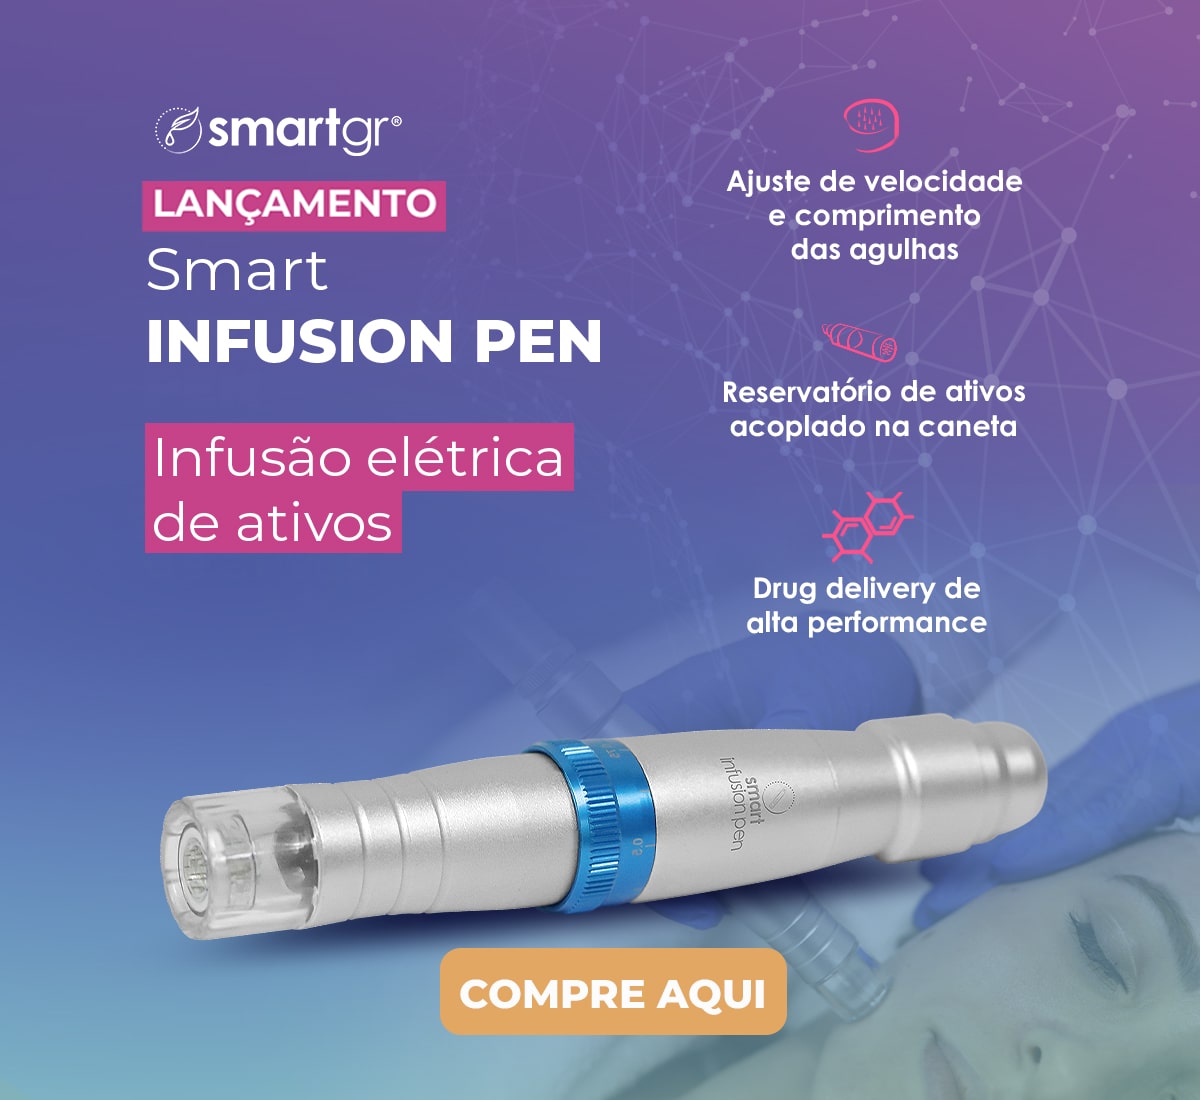 Mobile Infusion Pen